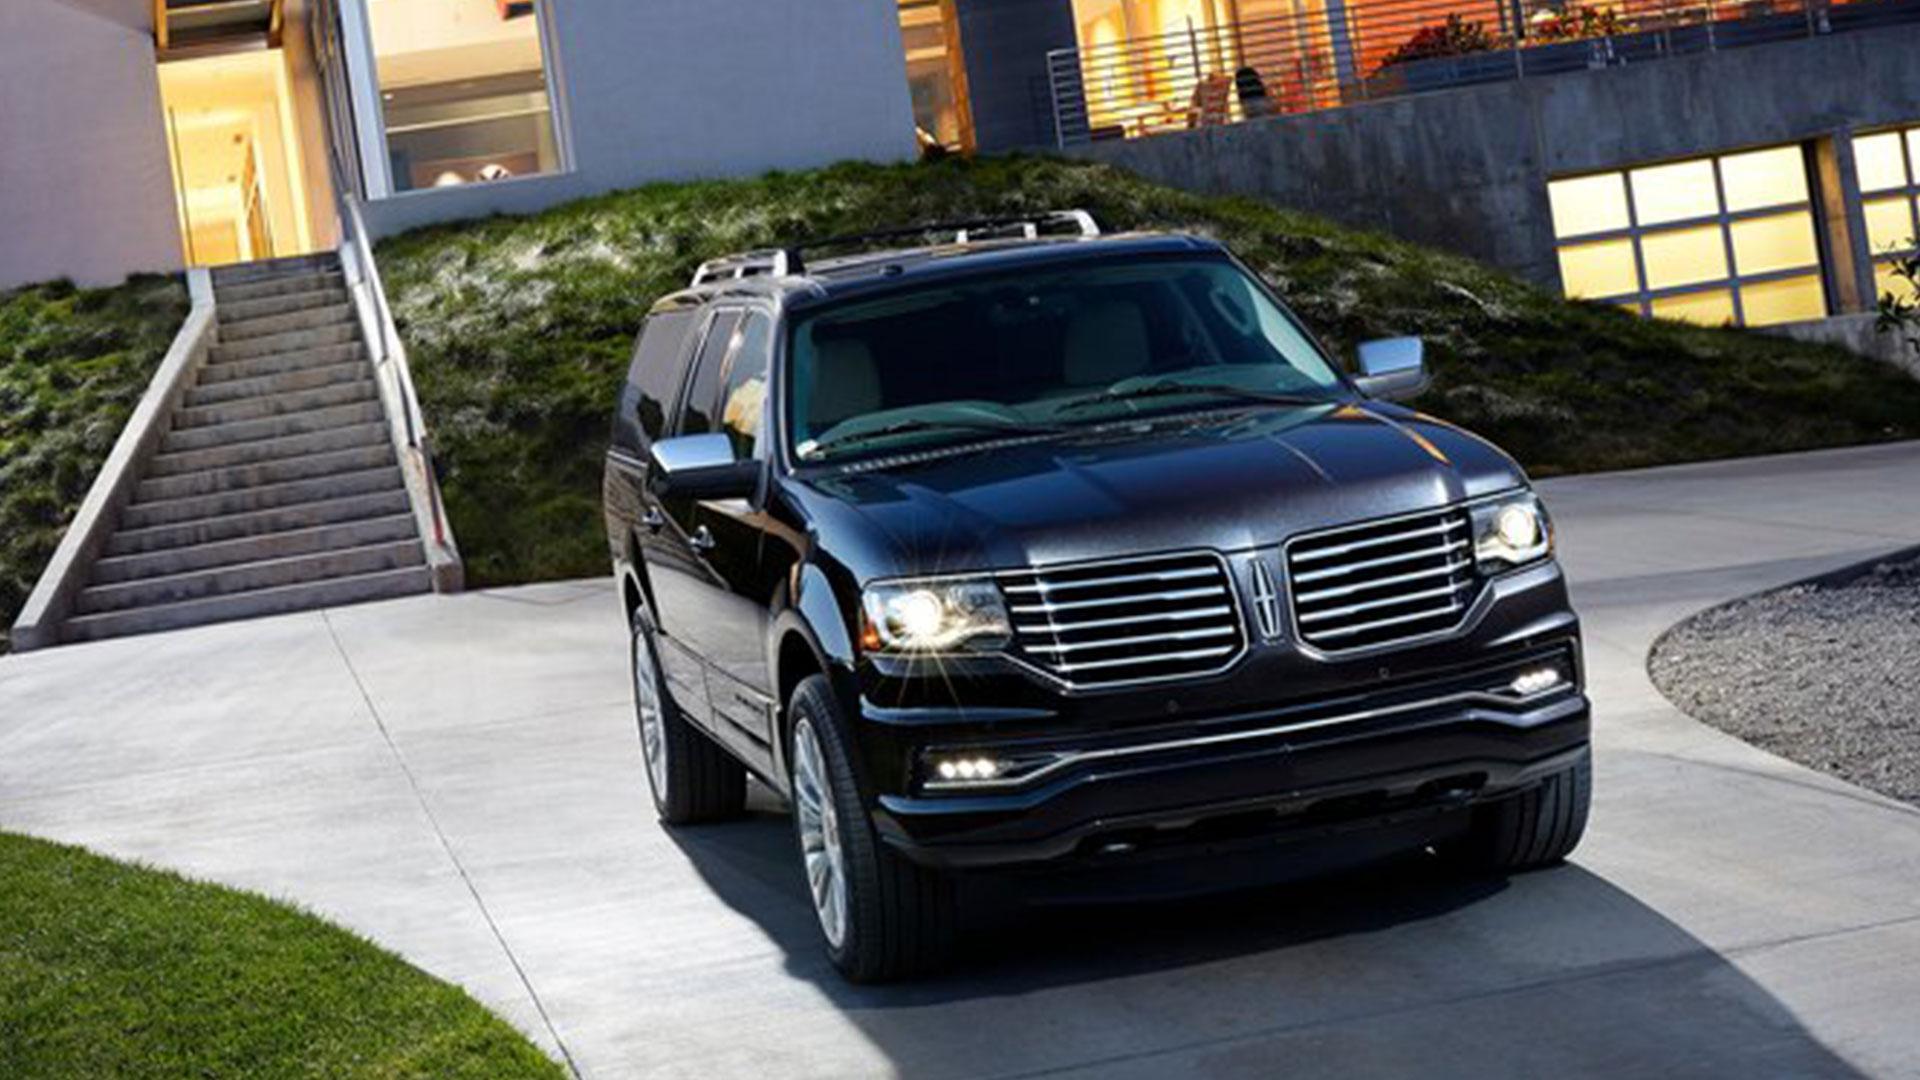 Lincoln Navigator Wallpaper HD Photo, Wallpaper and other